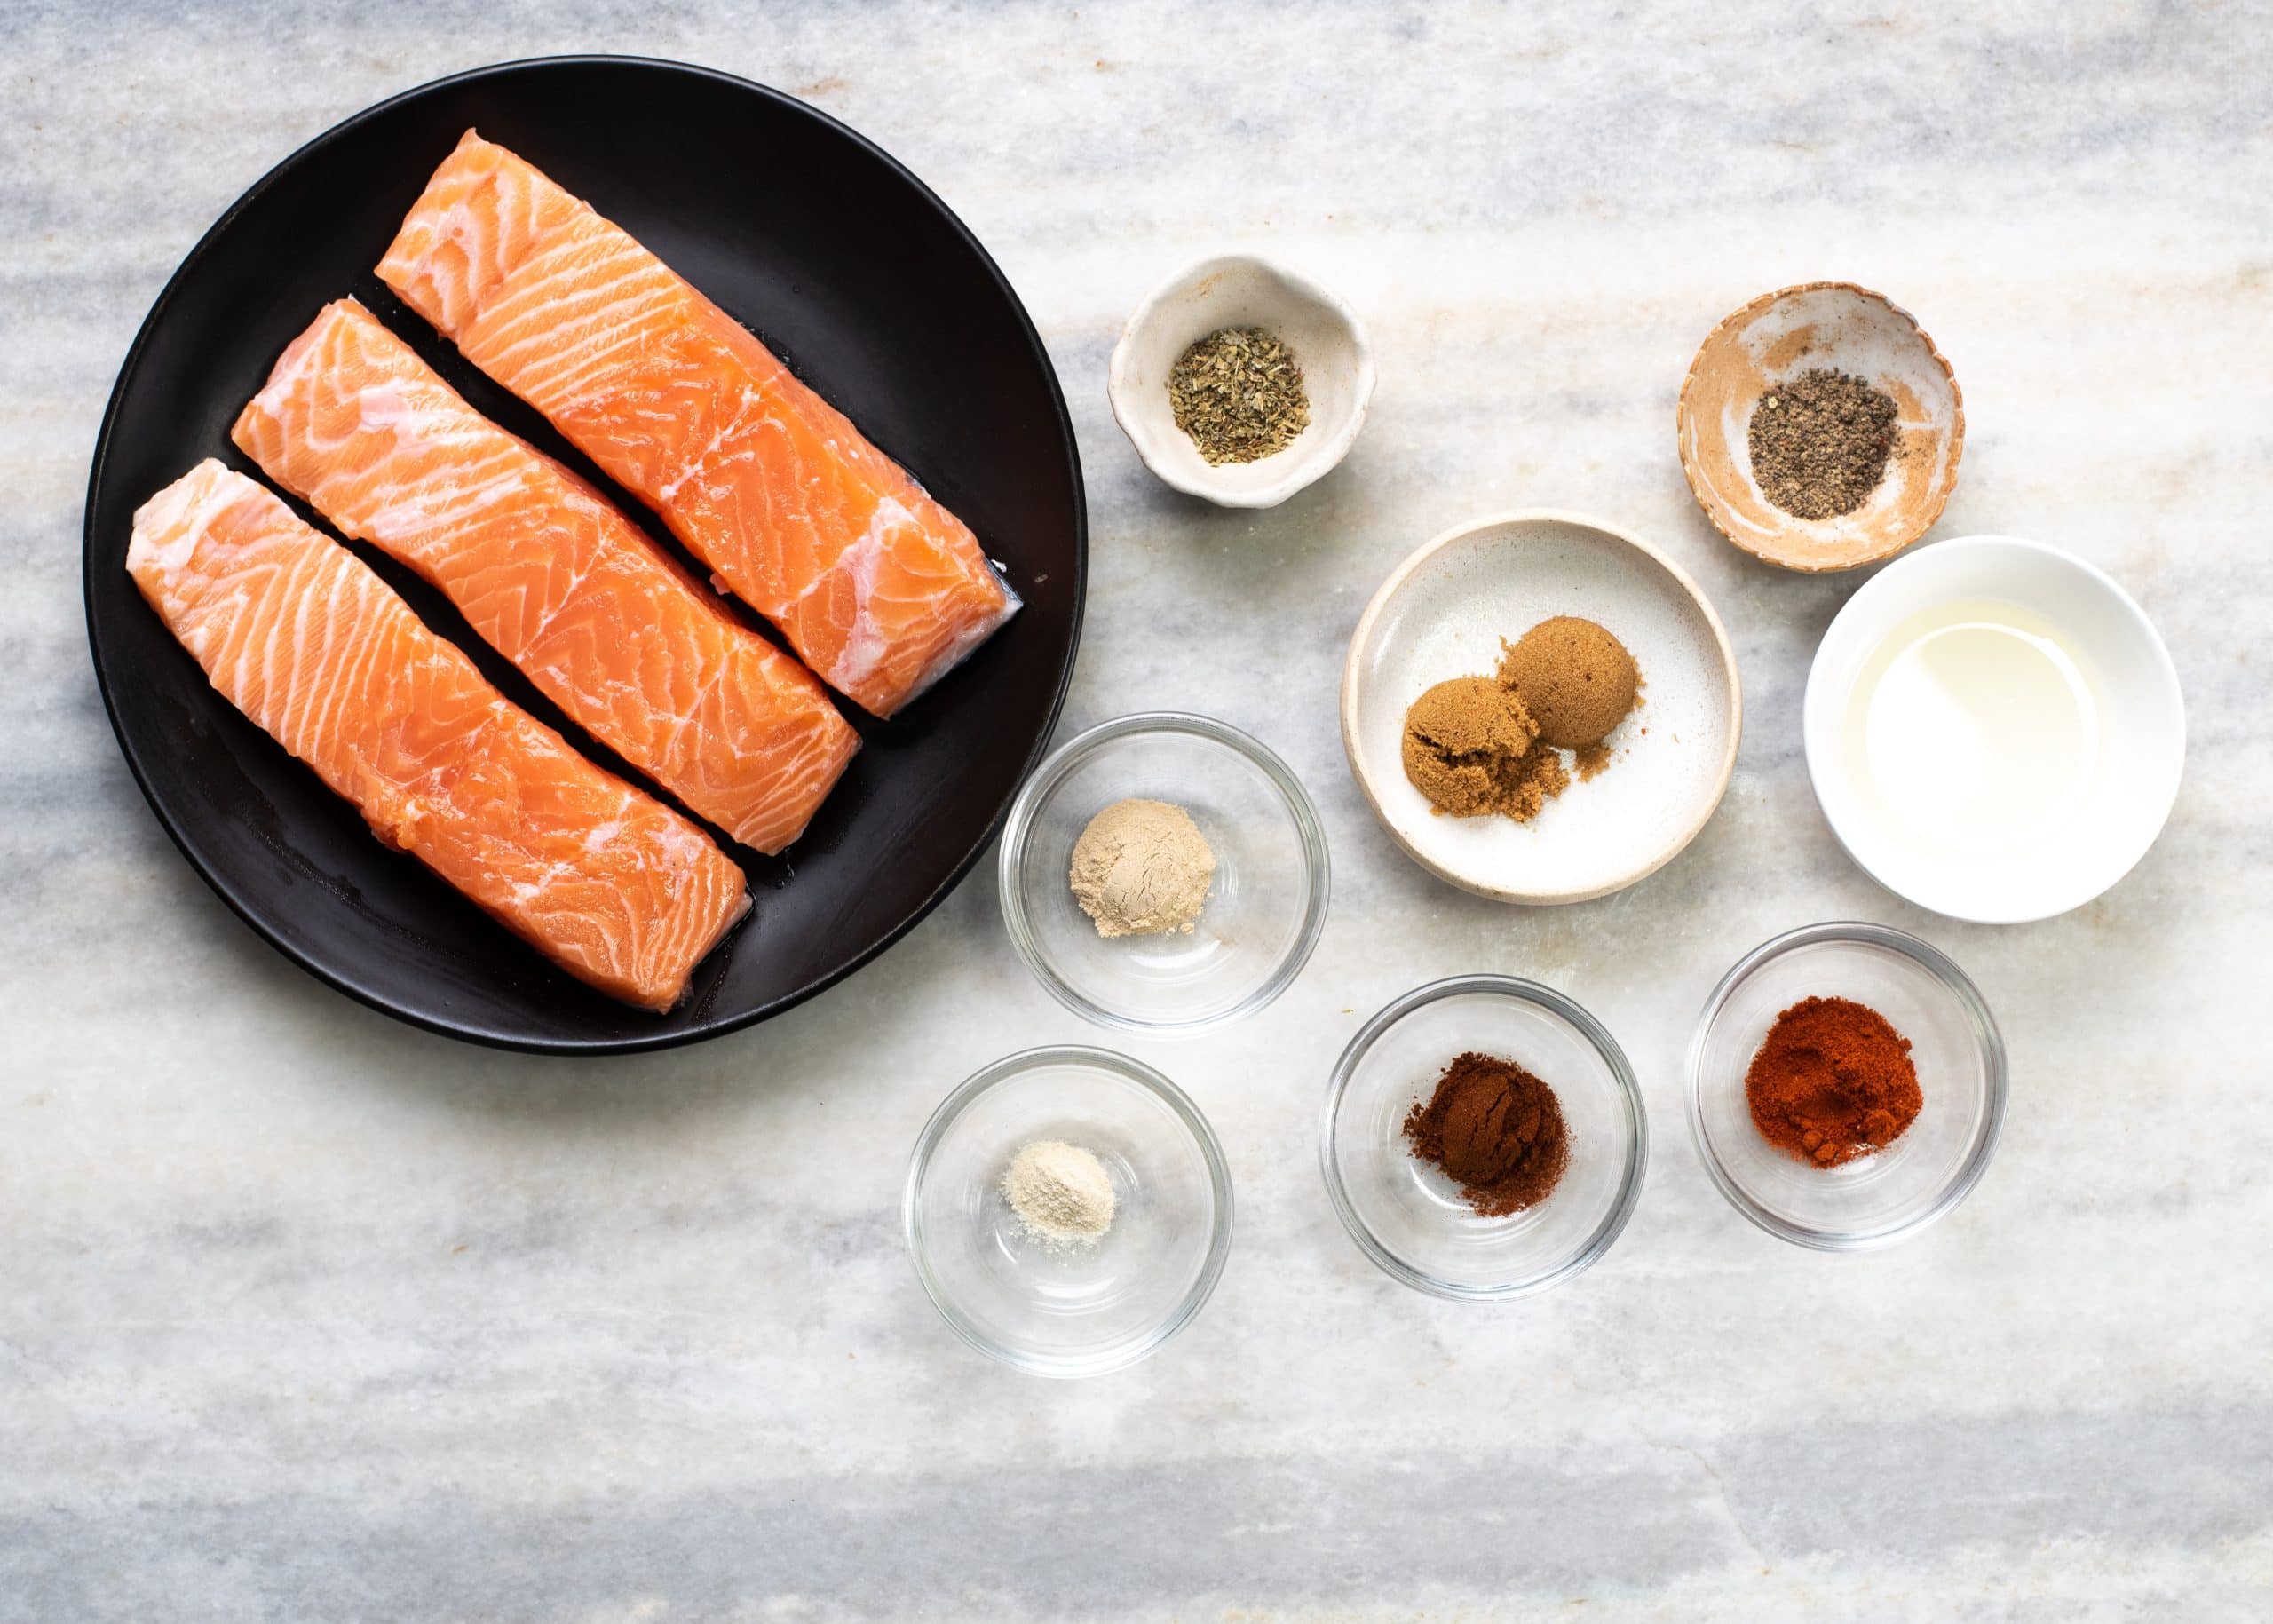 Ingredients needed to cook salmon in airfryer - salmon fillets, butter and ingredients to make a dry rub.